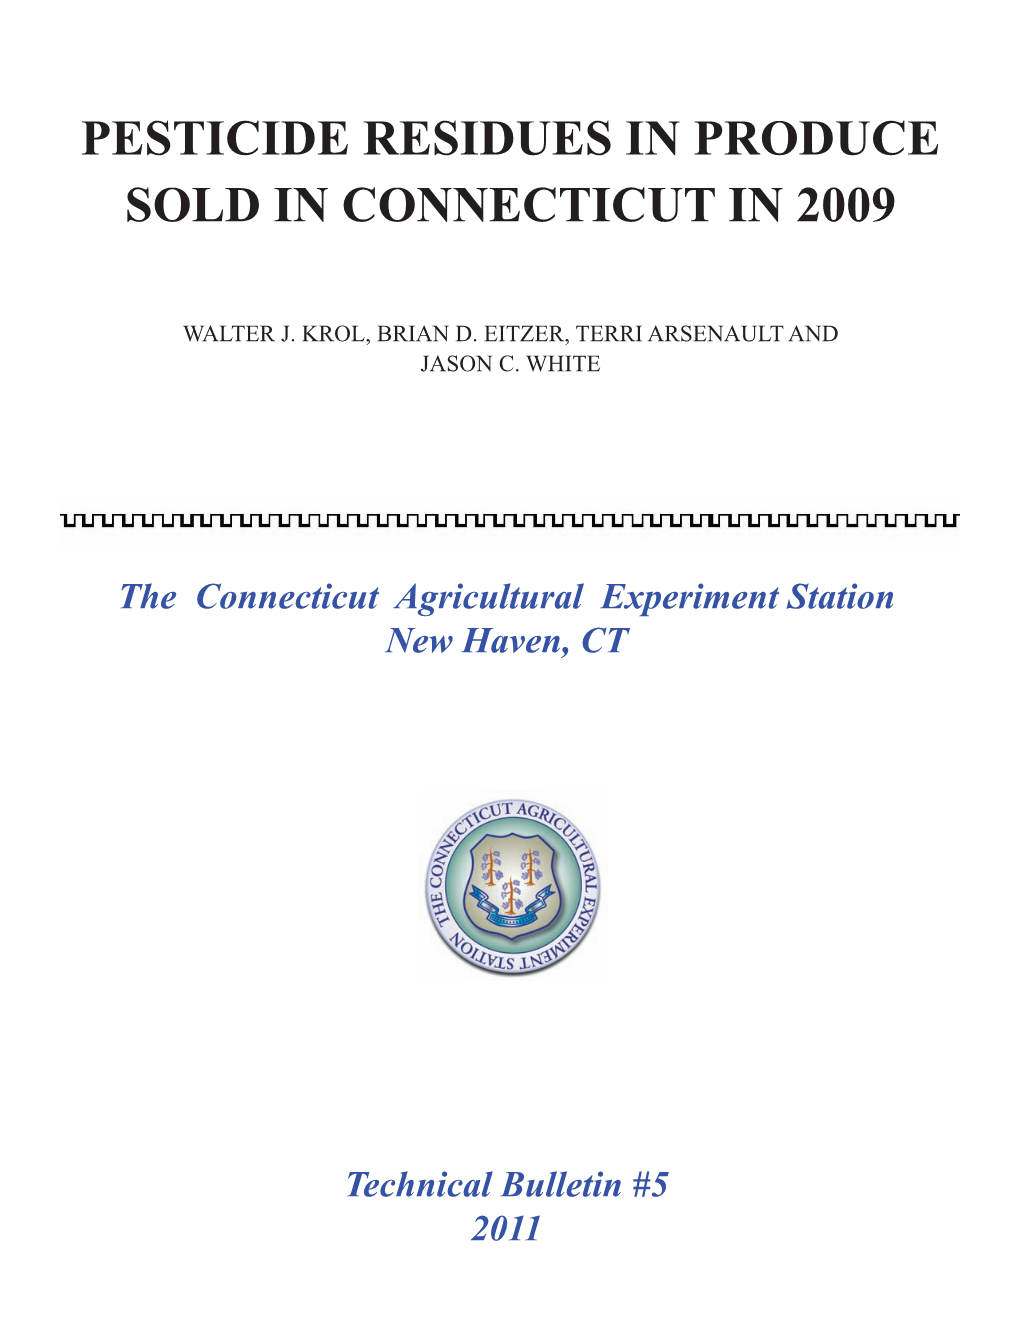 Technical Bulletin #5 2011 the Connecticut Agricultural Experiment Station Technical Bulletin #5